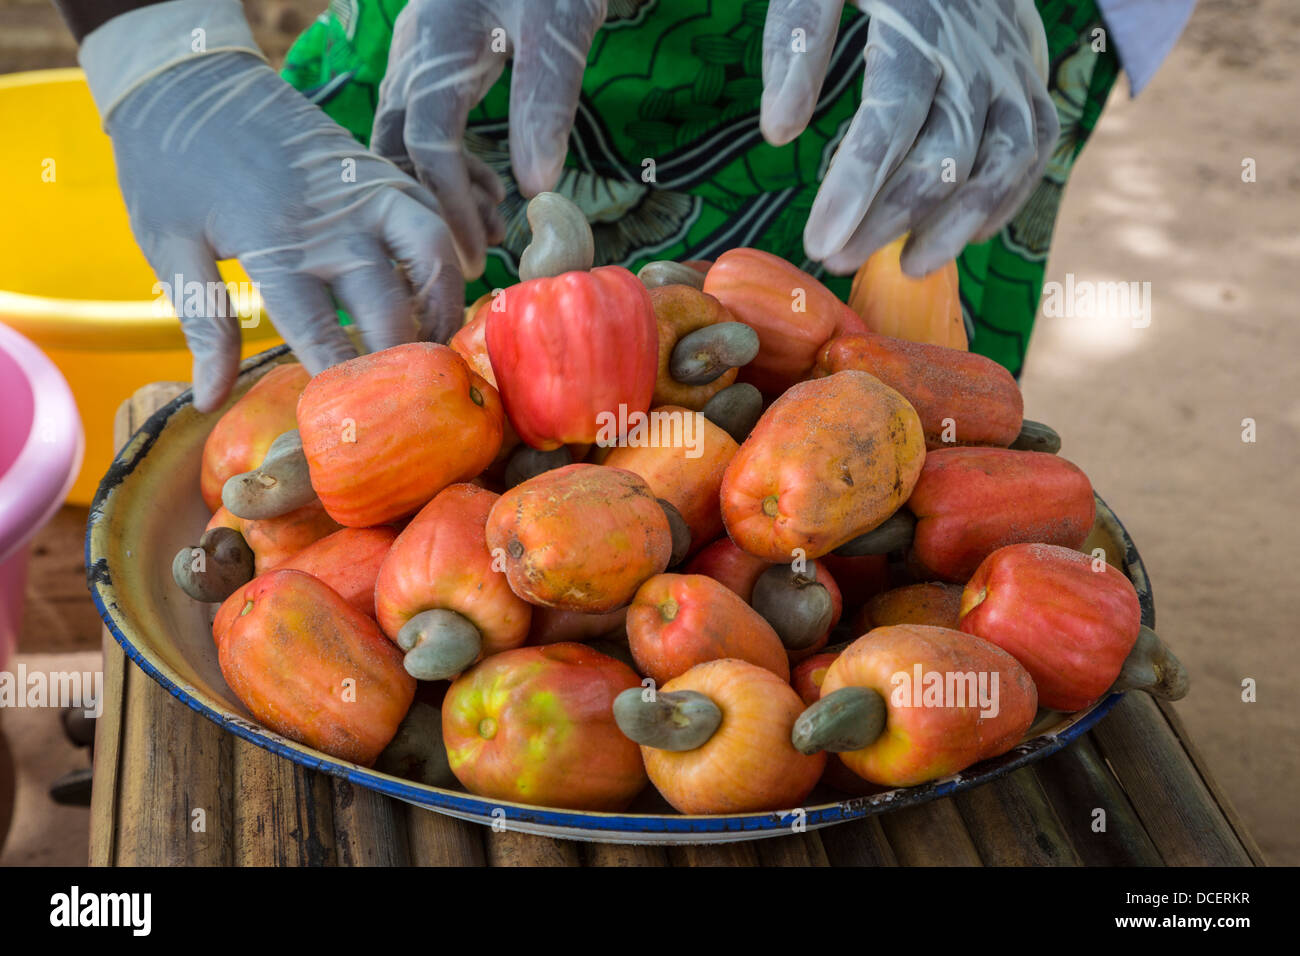 Bowl of Cashew Apples with Cashew Nuts Still Attached, The Gambia Stock Photo